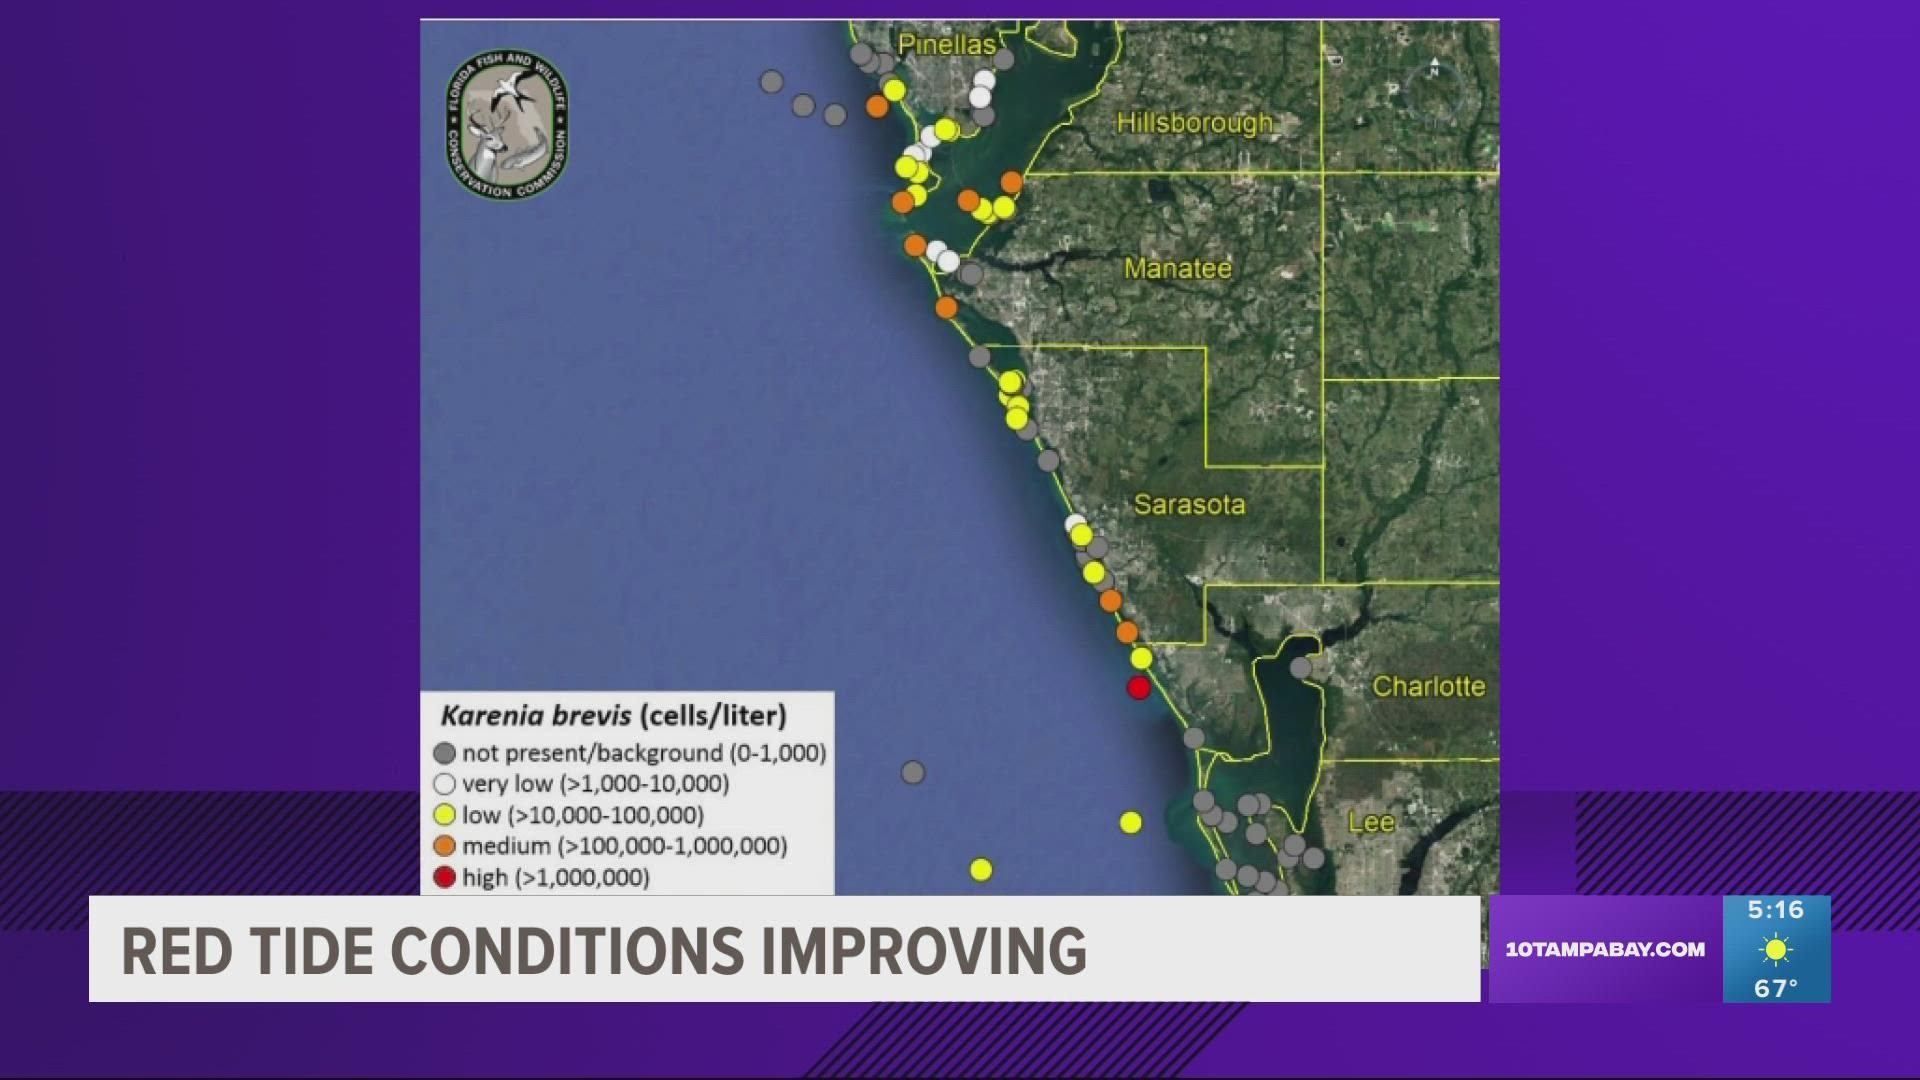 Different levels of red tide concentrations were found in waters in Pinellas, Hillsborough, Manatee and Sarasota counties.